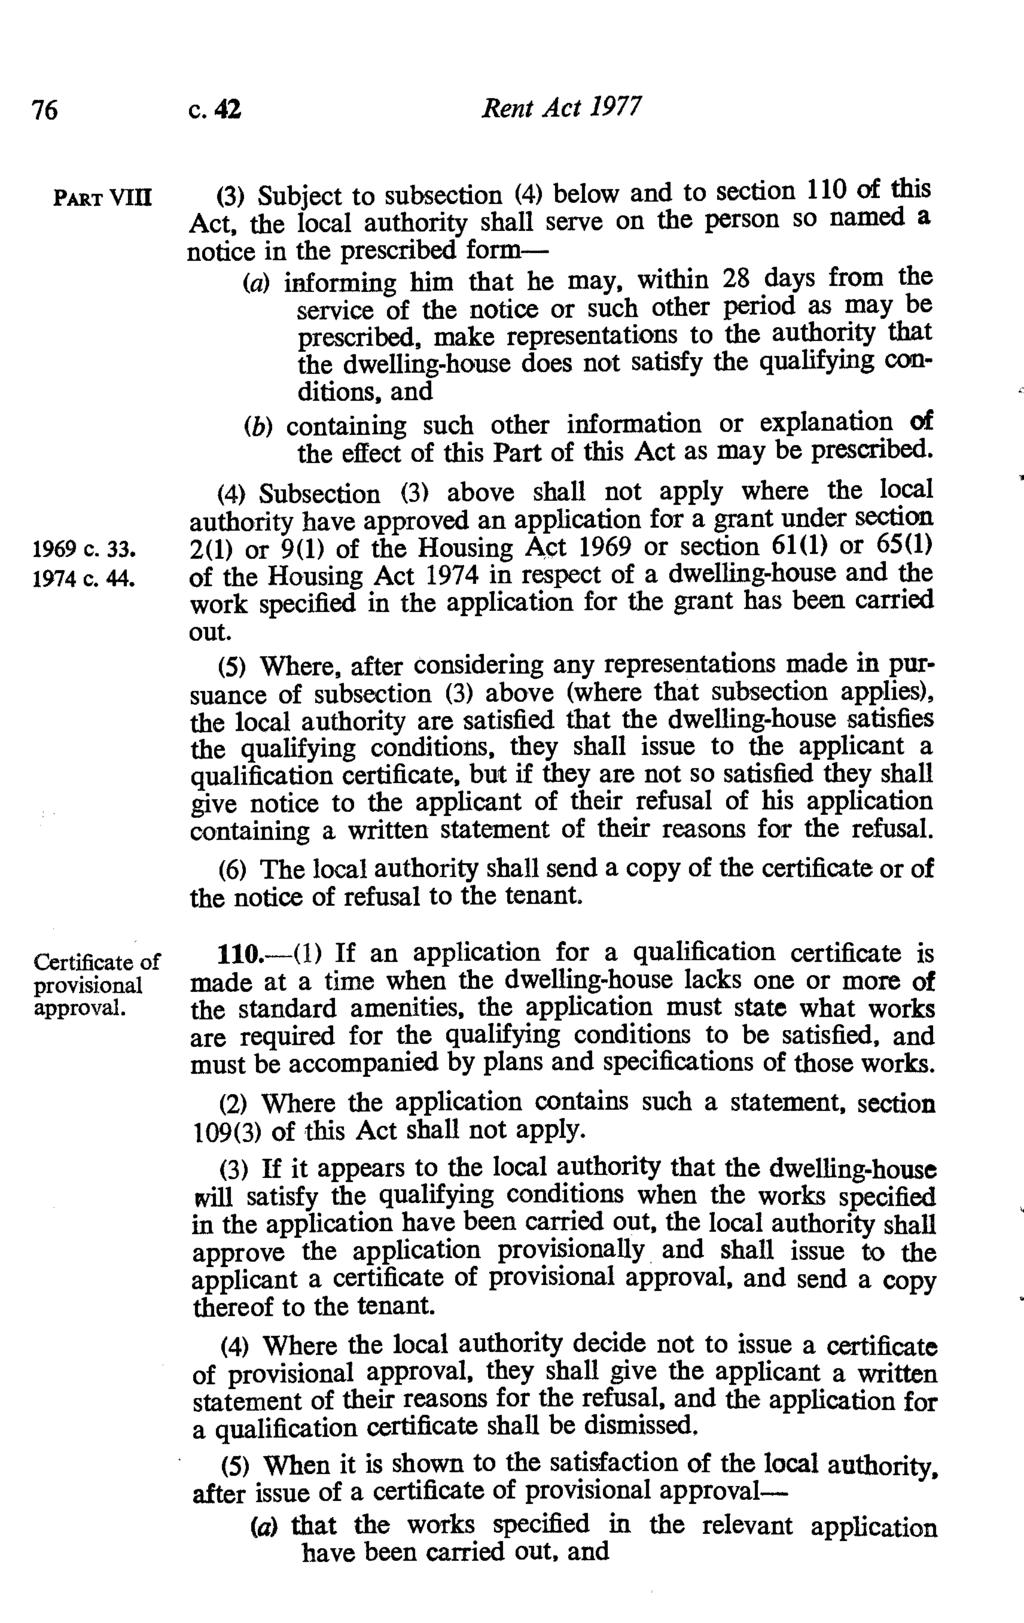 76 c. 42 Rent Act 1977 PART VIII (3) Subject to subsection (4) below and to section 110 of this Act, the local authority shall serve on the person so named a notice in the prescribed form- (a)